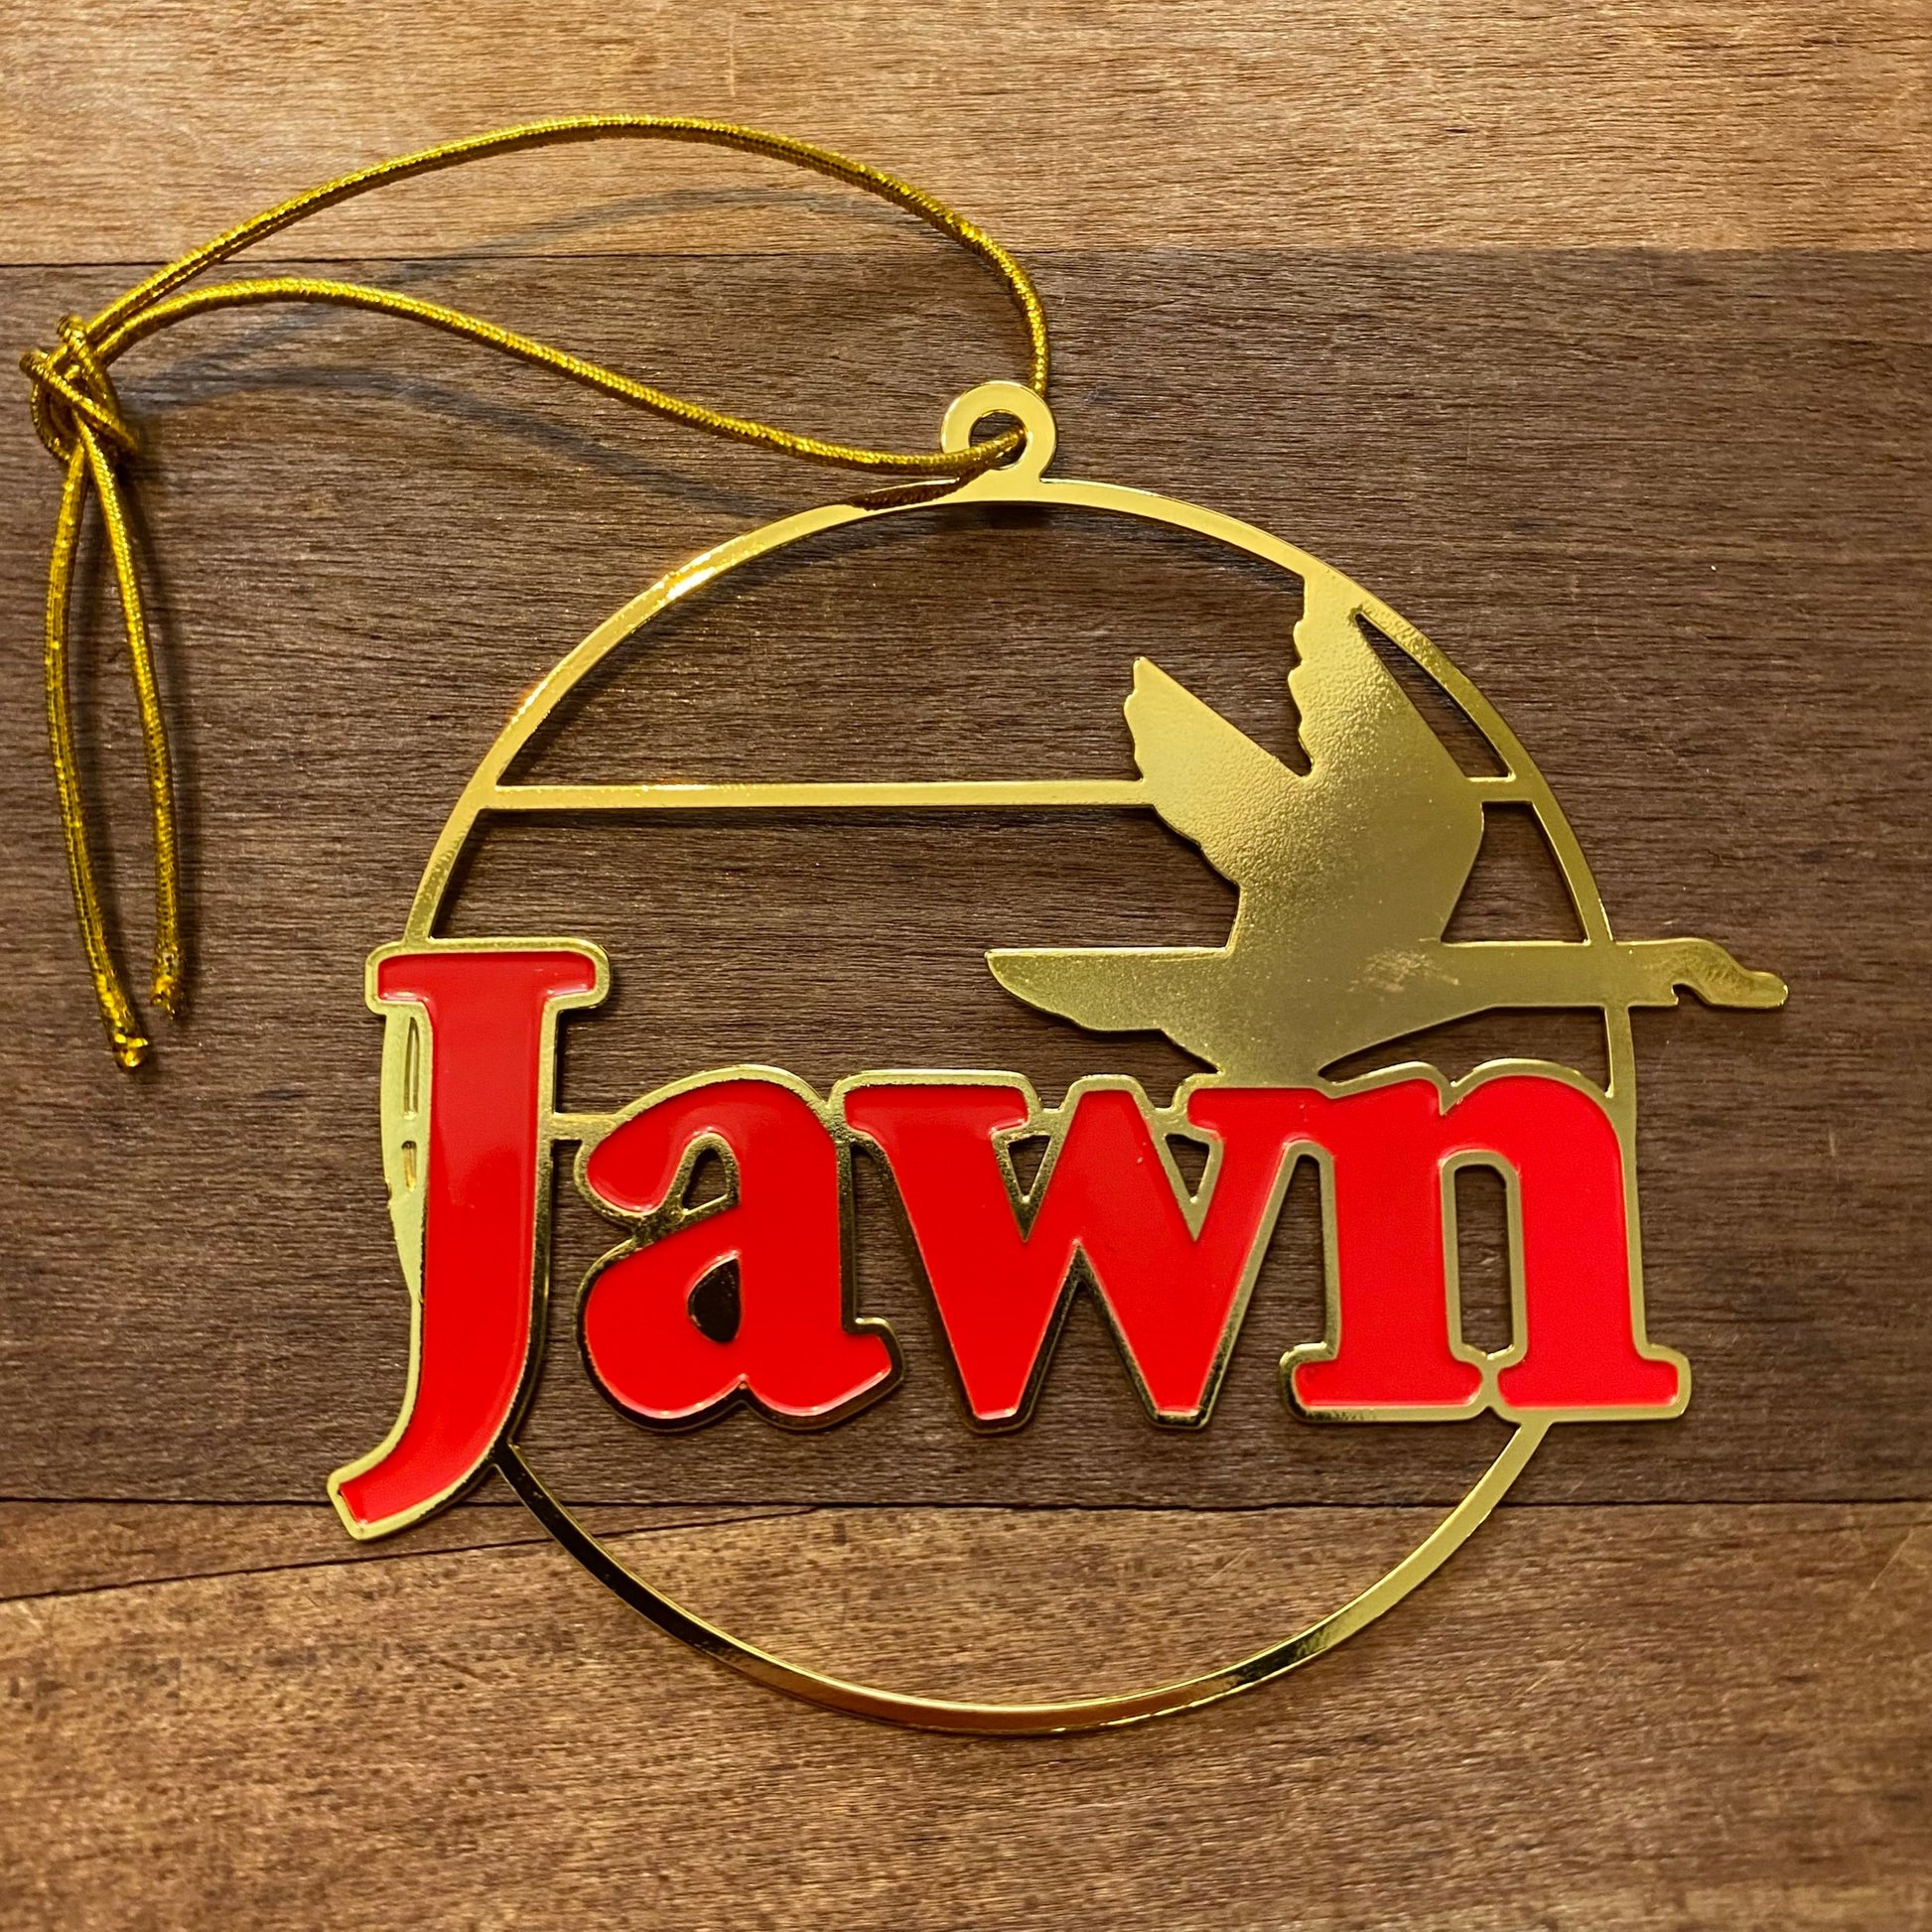 Gold and red Jawn Ornament with the word "jawn" and a silhouette of a flying bird, featuring the South Fellini logo.